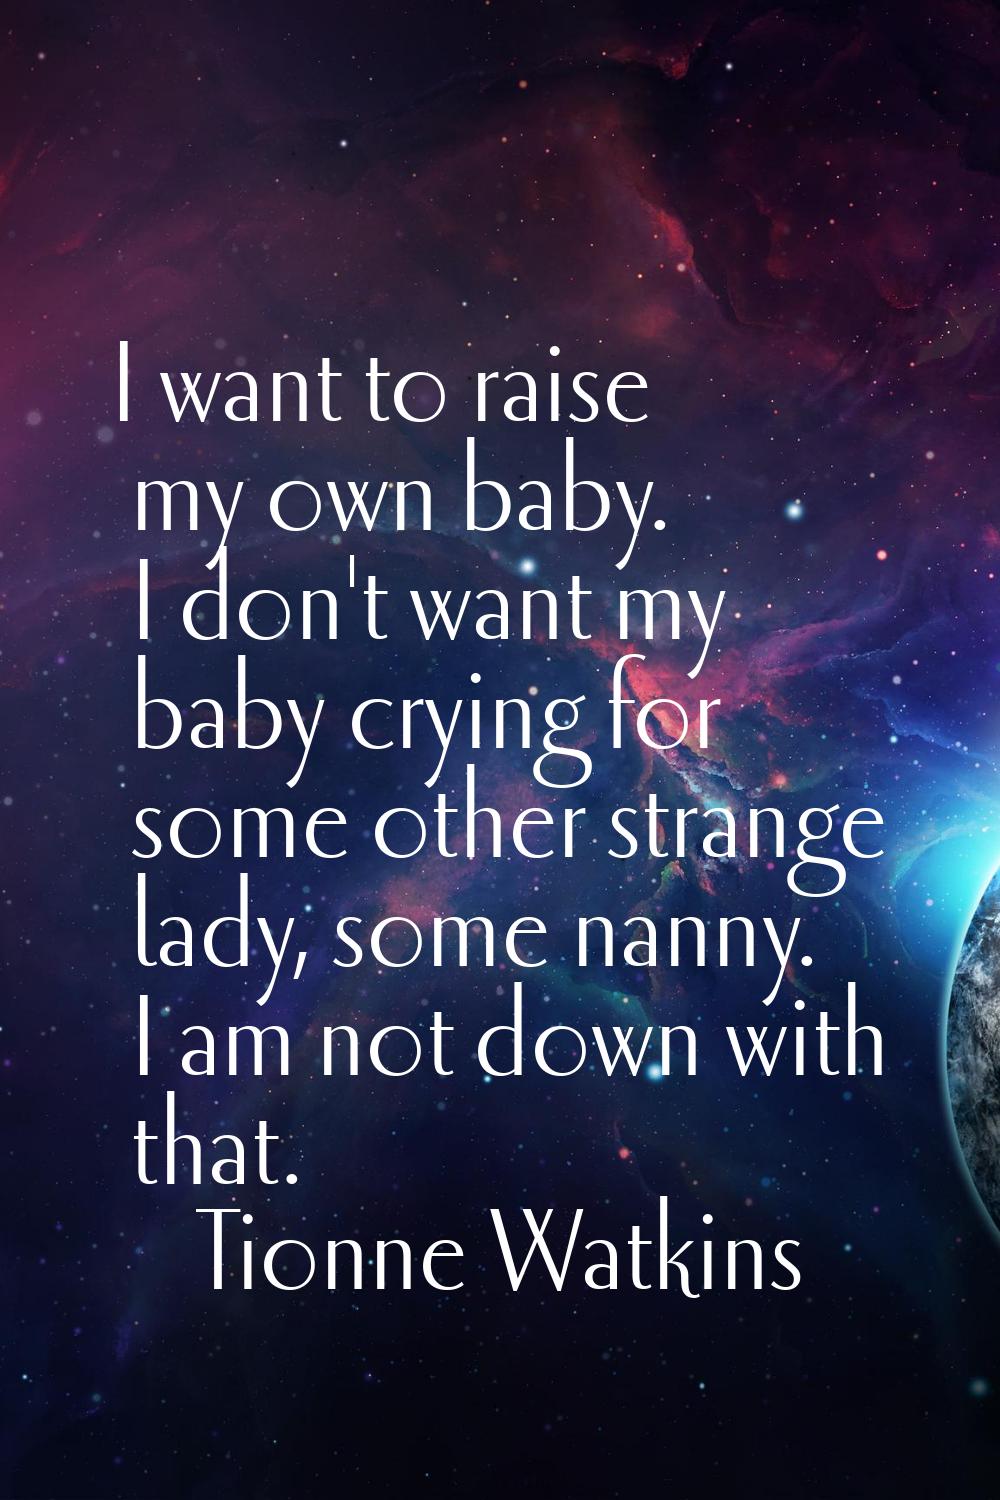 I want to raise my own baby. I don't want my baby crying for some other strange lady, some nanny. I